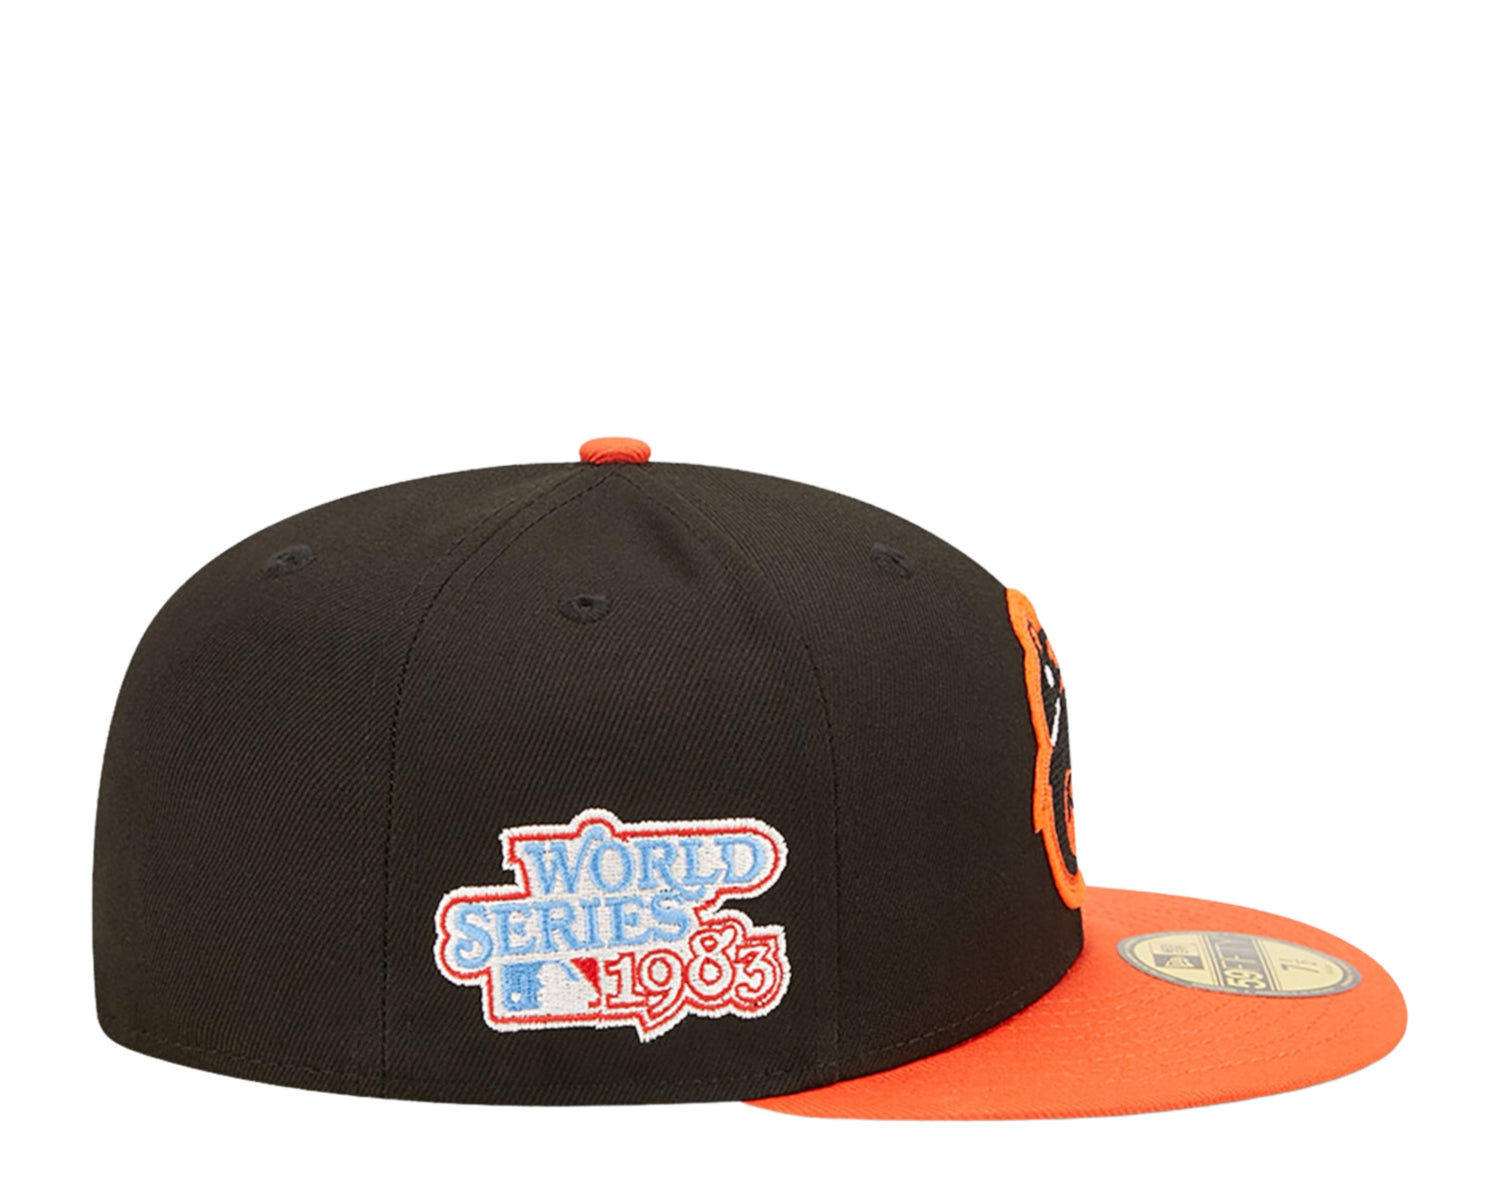 New Era 59Fifty MLB Baltimore Orioles Letterman Fitted Hat